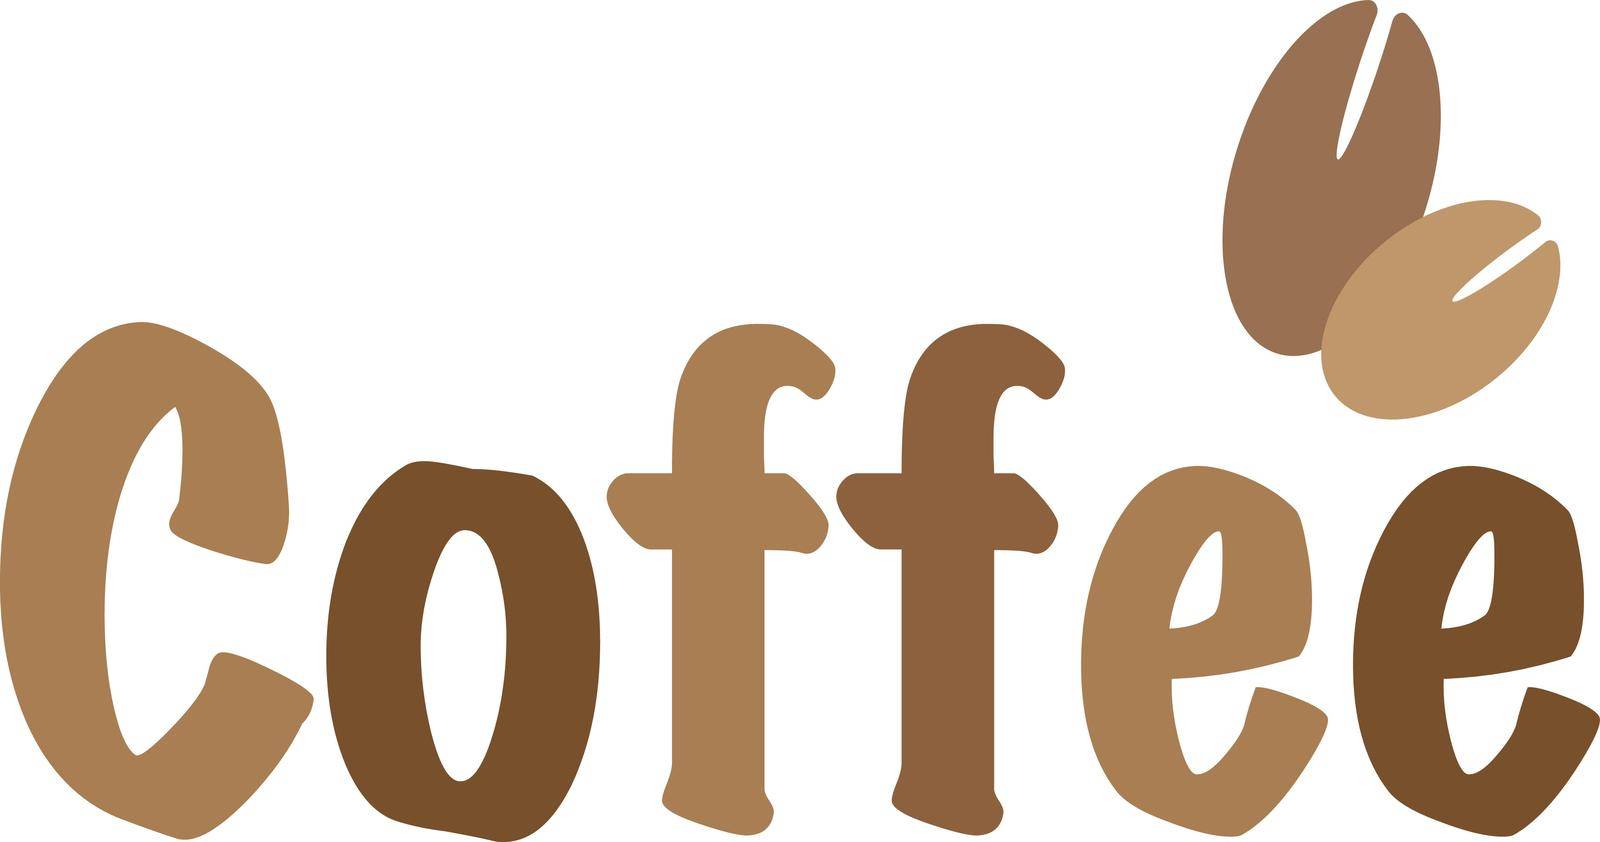 Coffee beans and coffee logo. by illust_monster